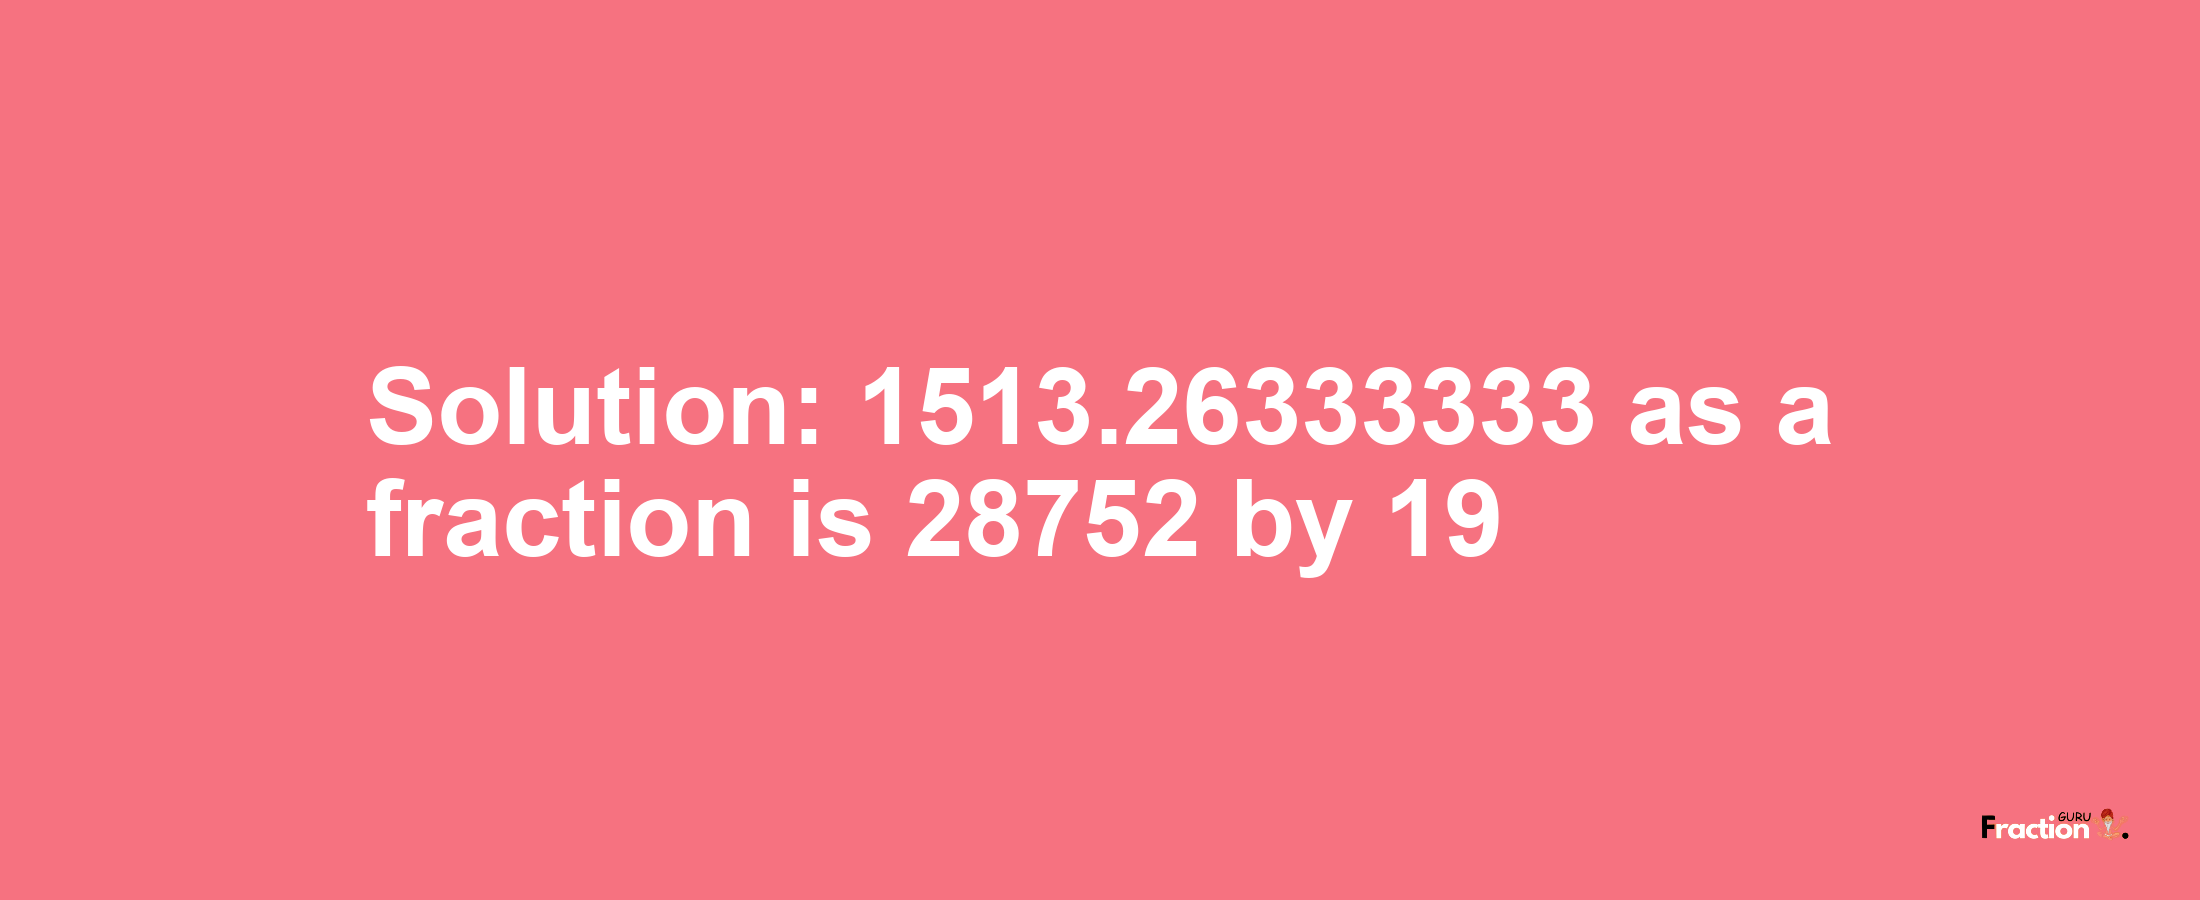 Solution:1513.26333333 as a fraction is 28752/19